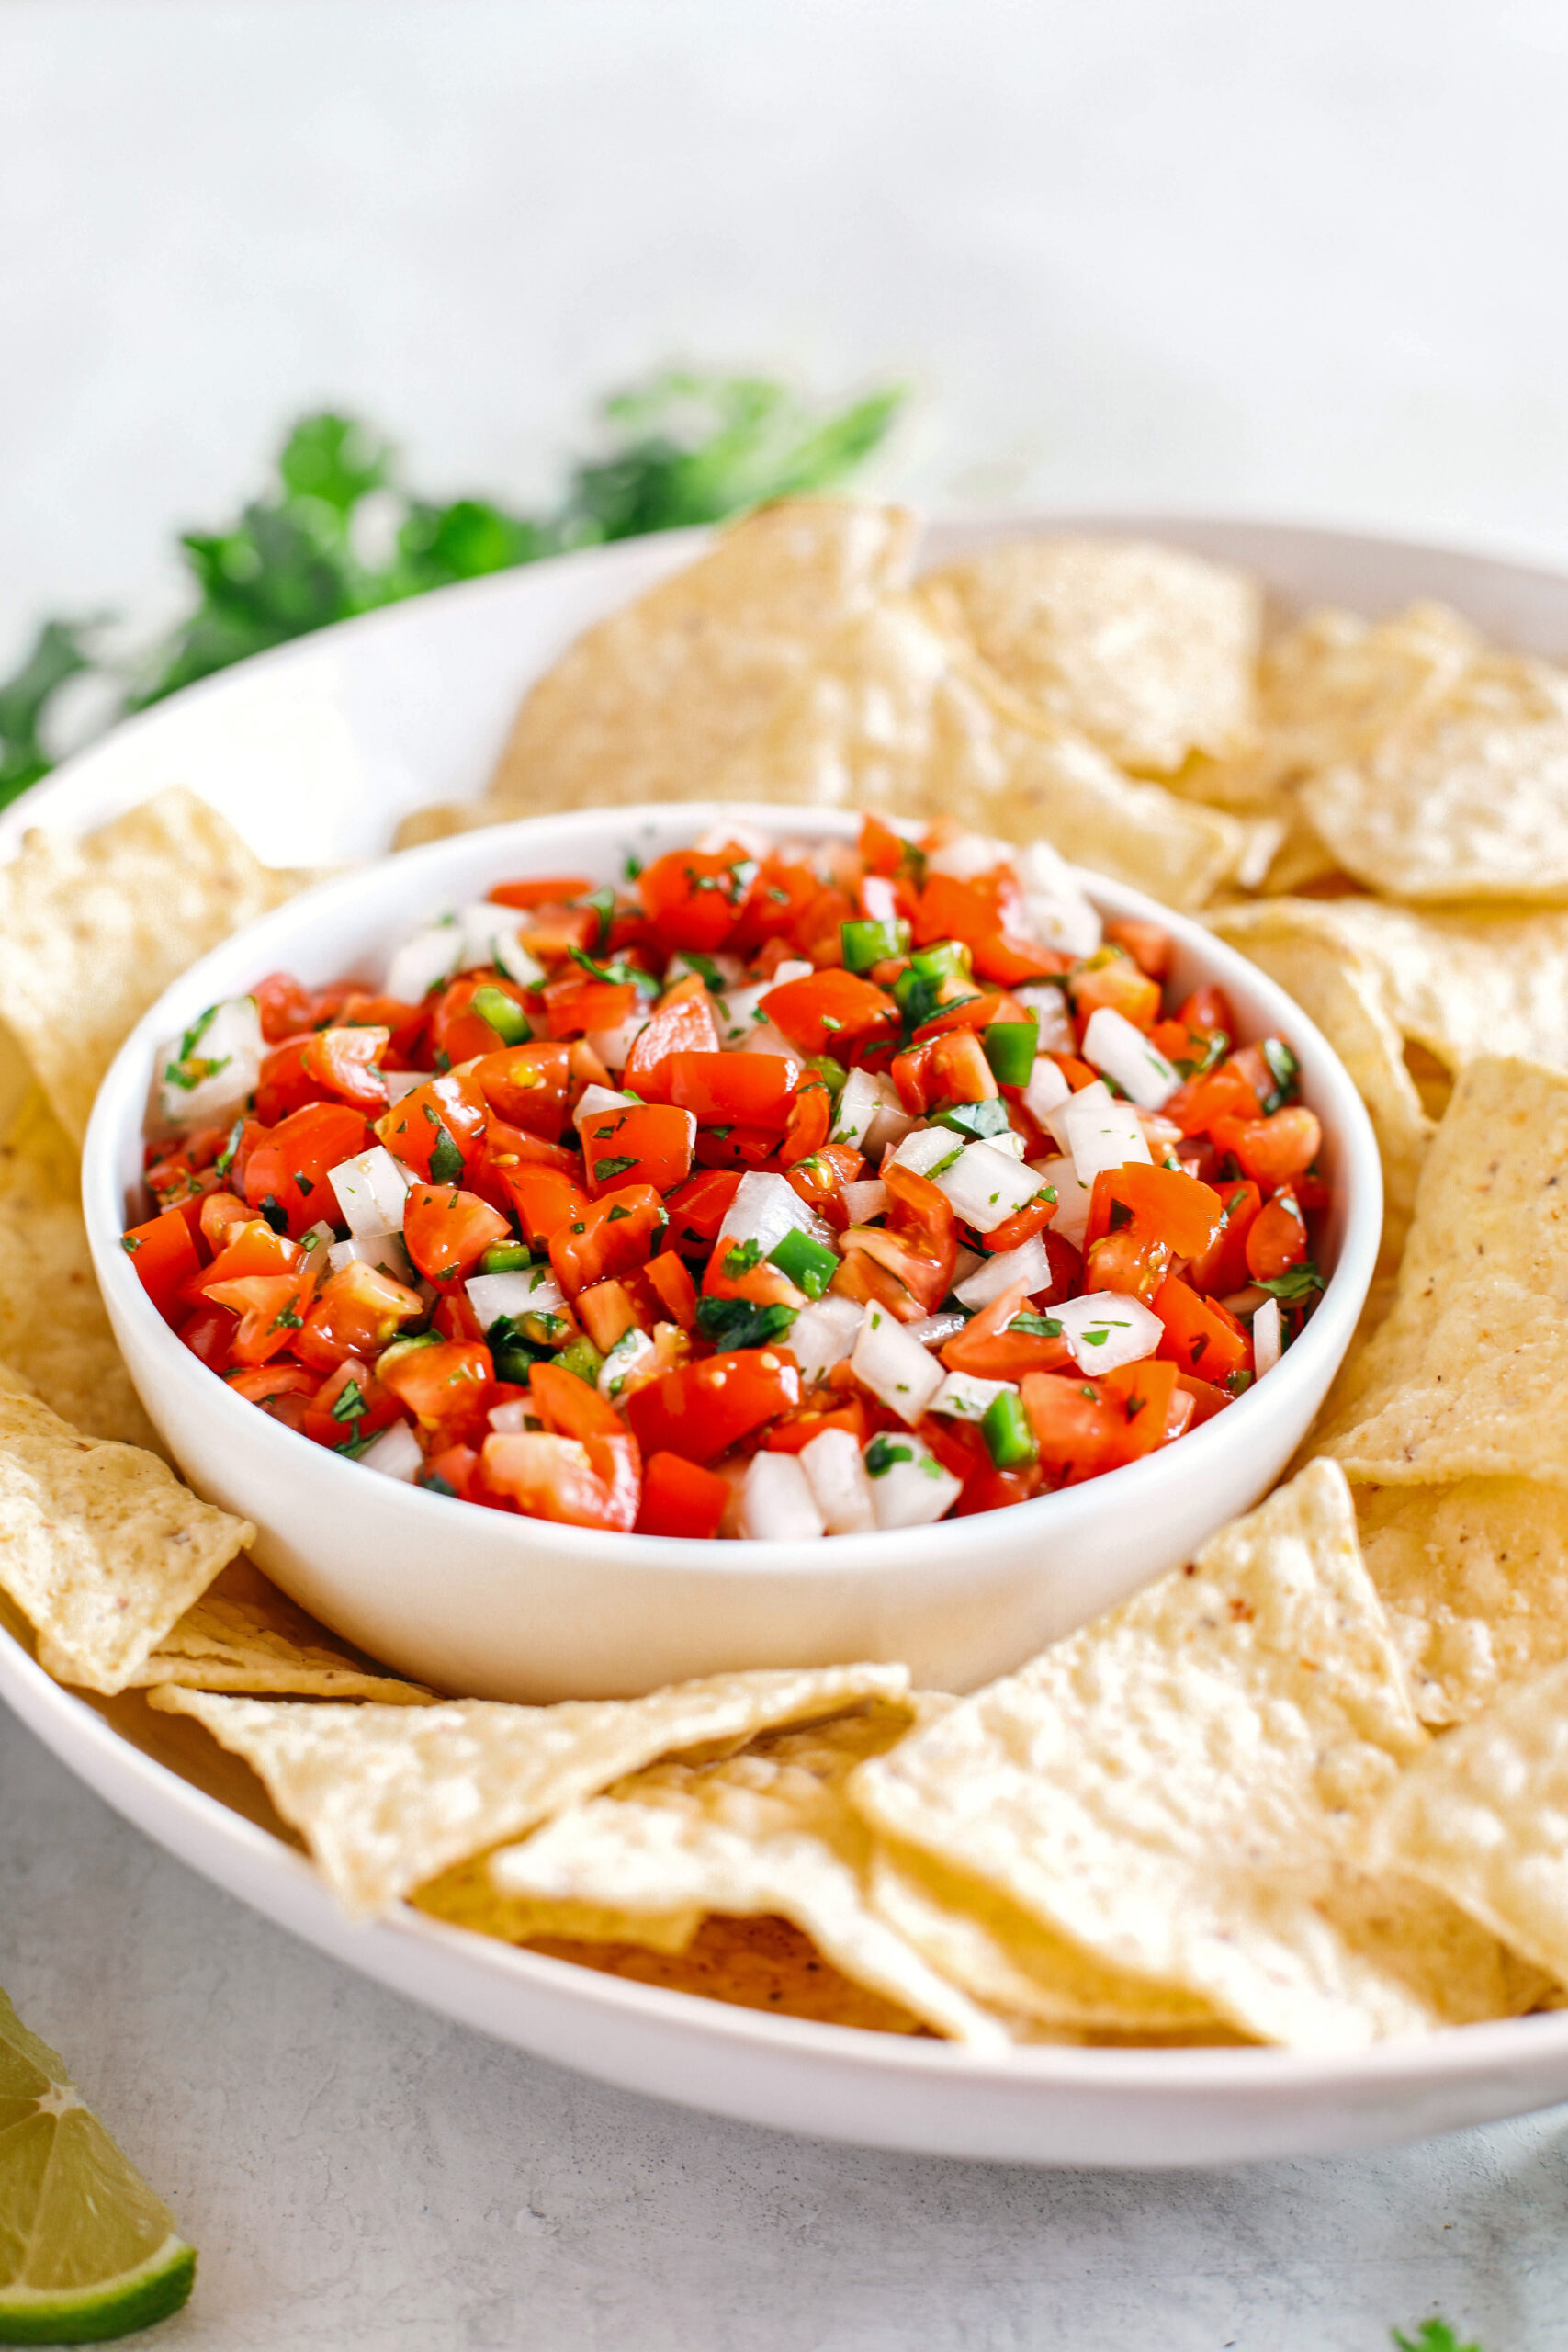 Fresh Homemade Pico De Gallo made with just a few simple ingredients for the perfect flavor boost to any healthy meal or serve as a delicious salsa with chips!